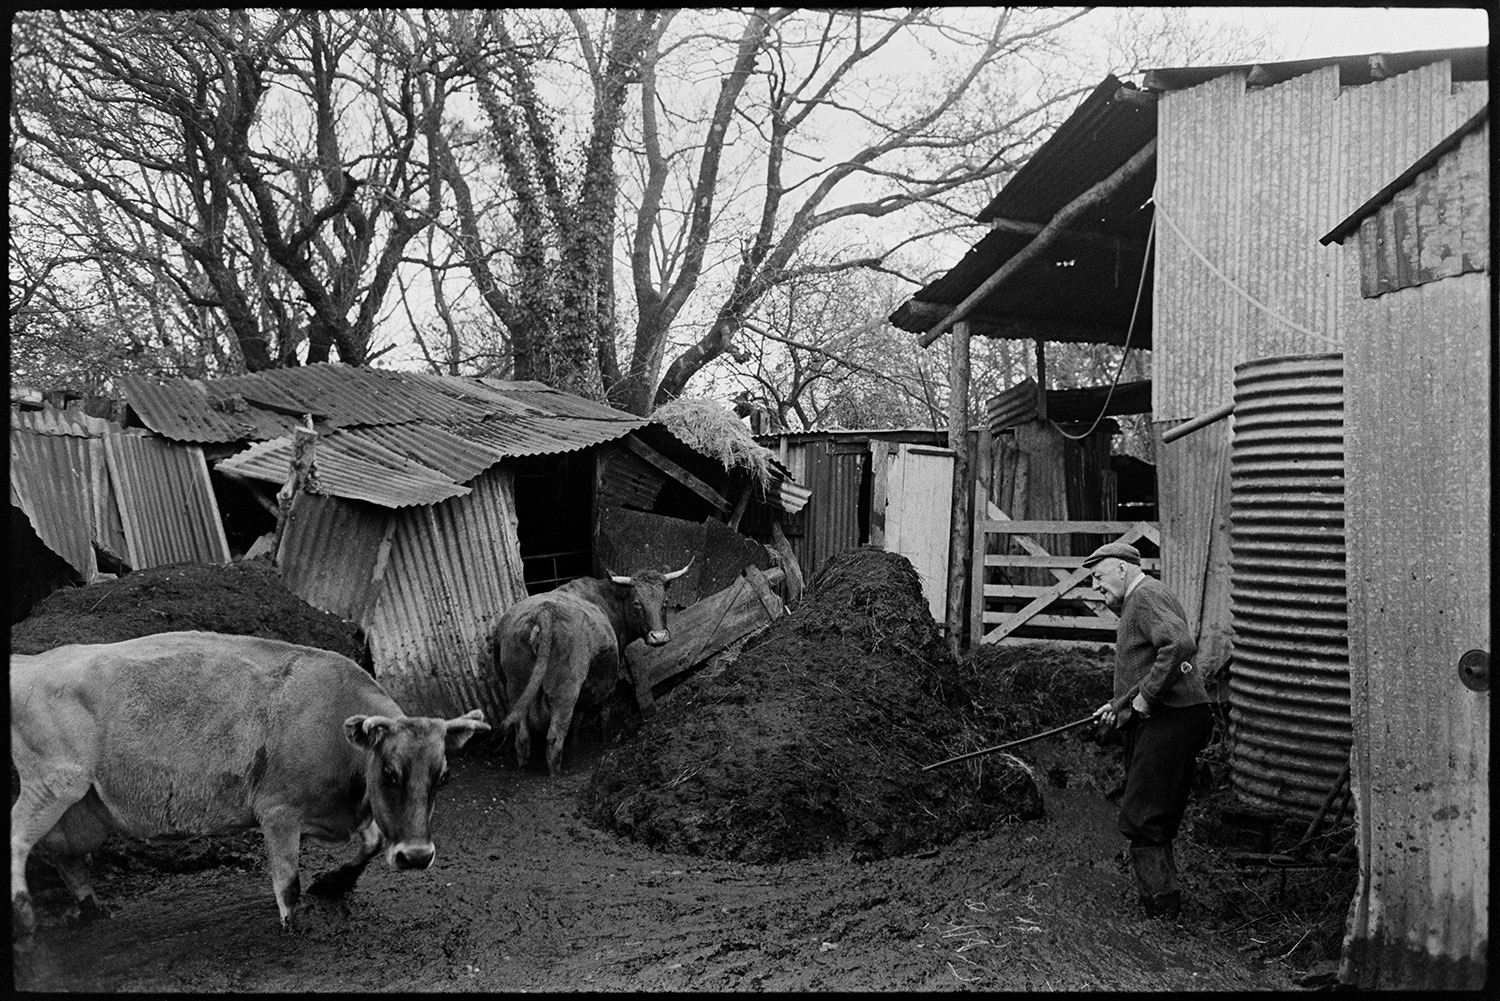 Cows in muddy yard, collapsing corrugated iron sheds and barn. 
[Cyril Bennett and two horned cows in a muddy farmyard with a dung heap and collapsing corrugated iron sheds, at Cuppers Piece, Beaford.]